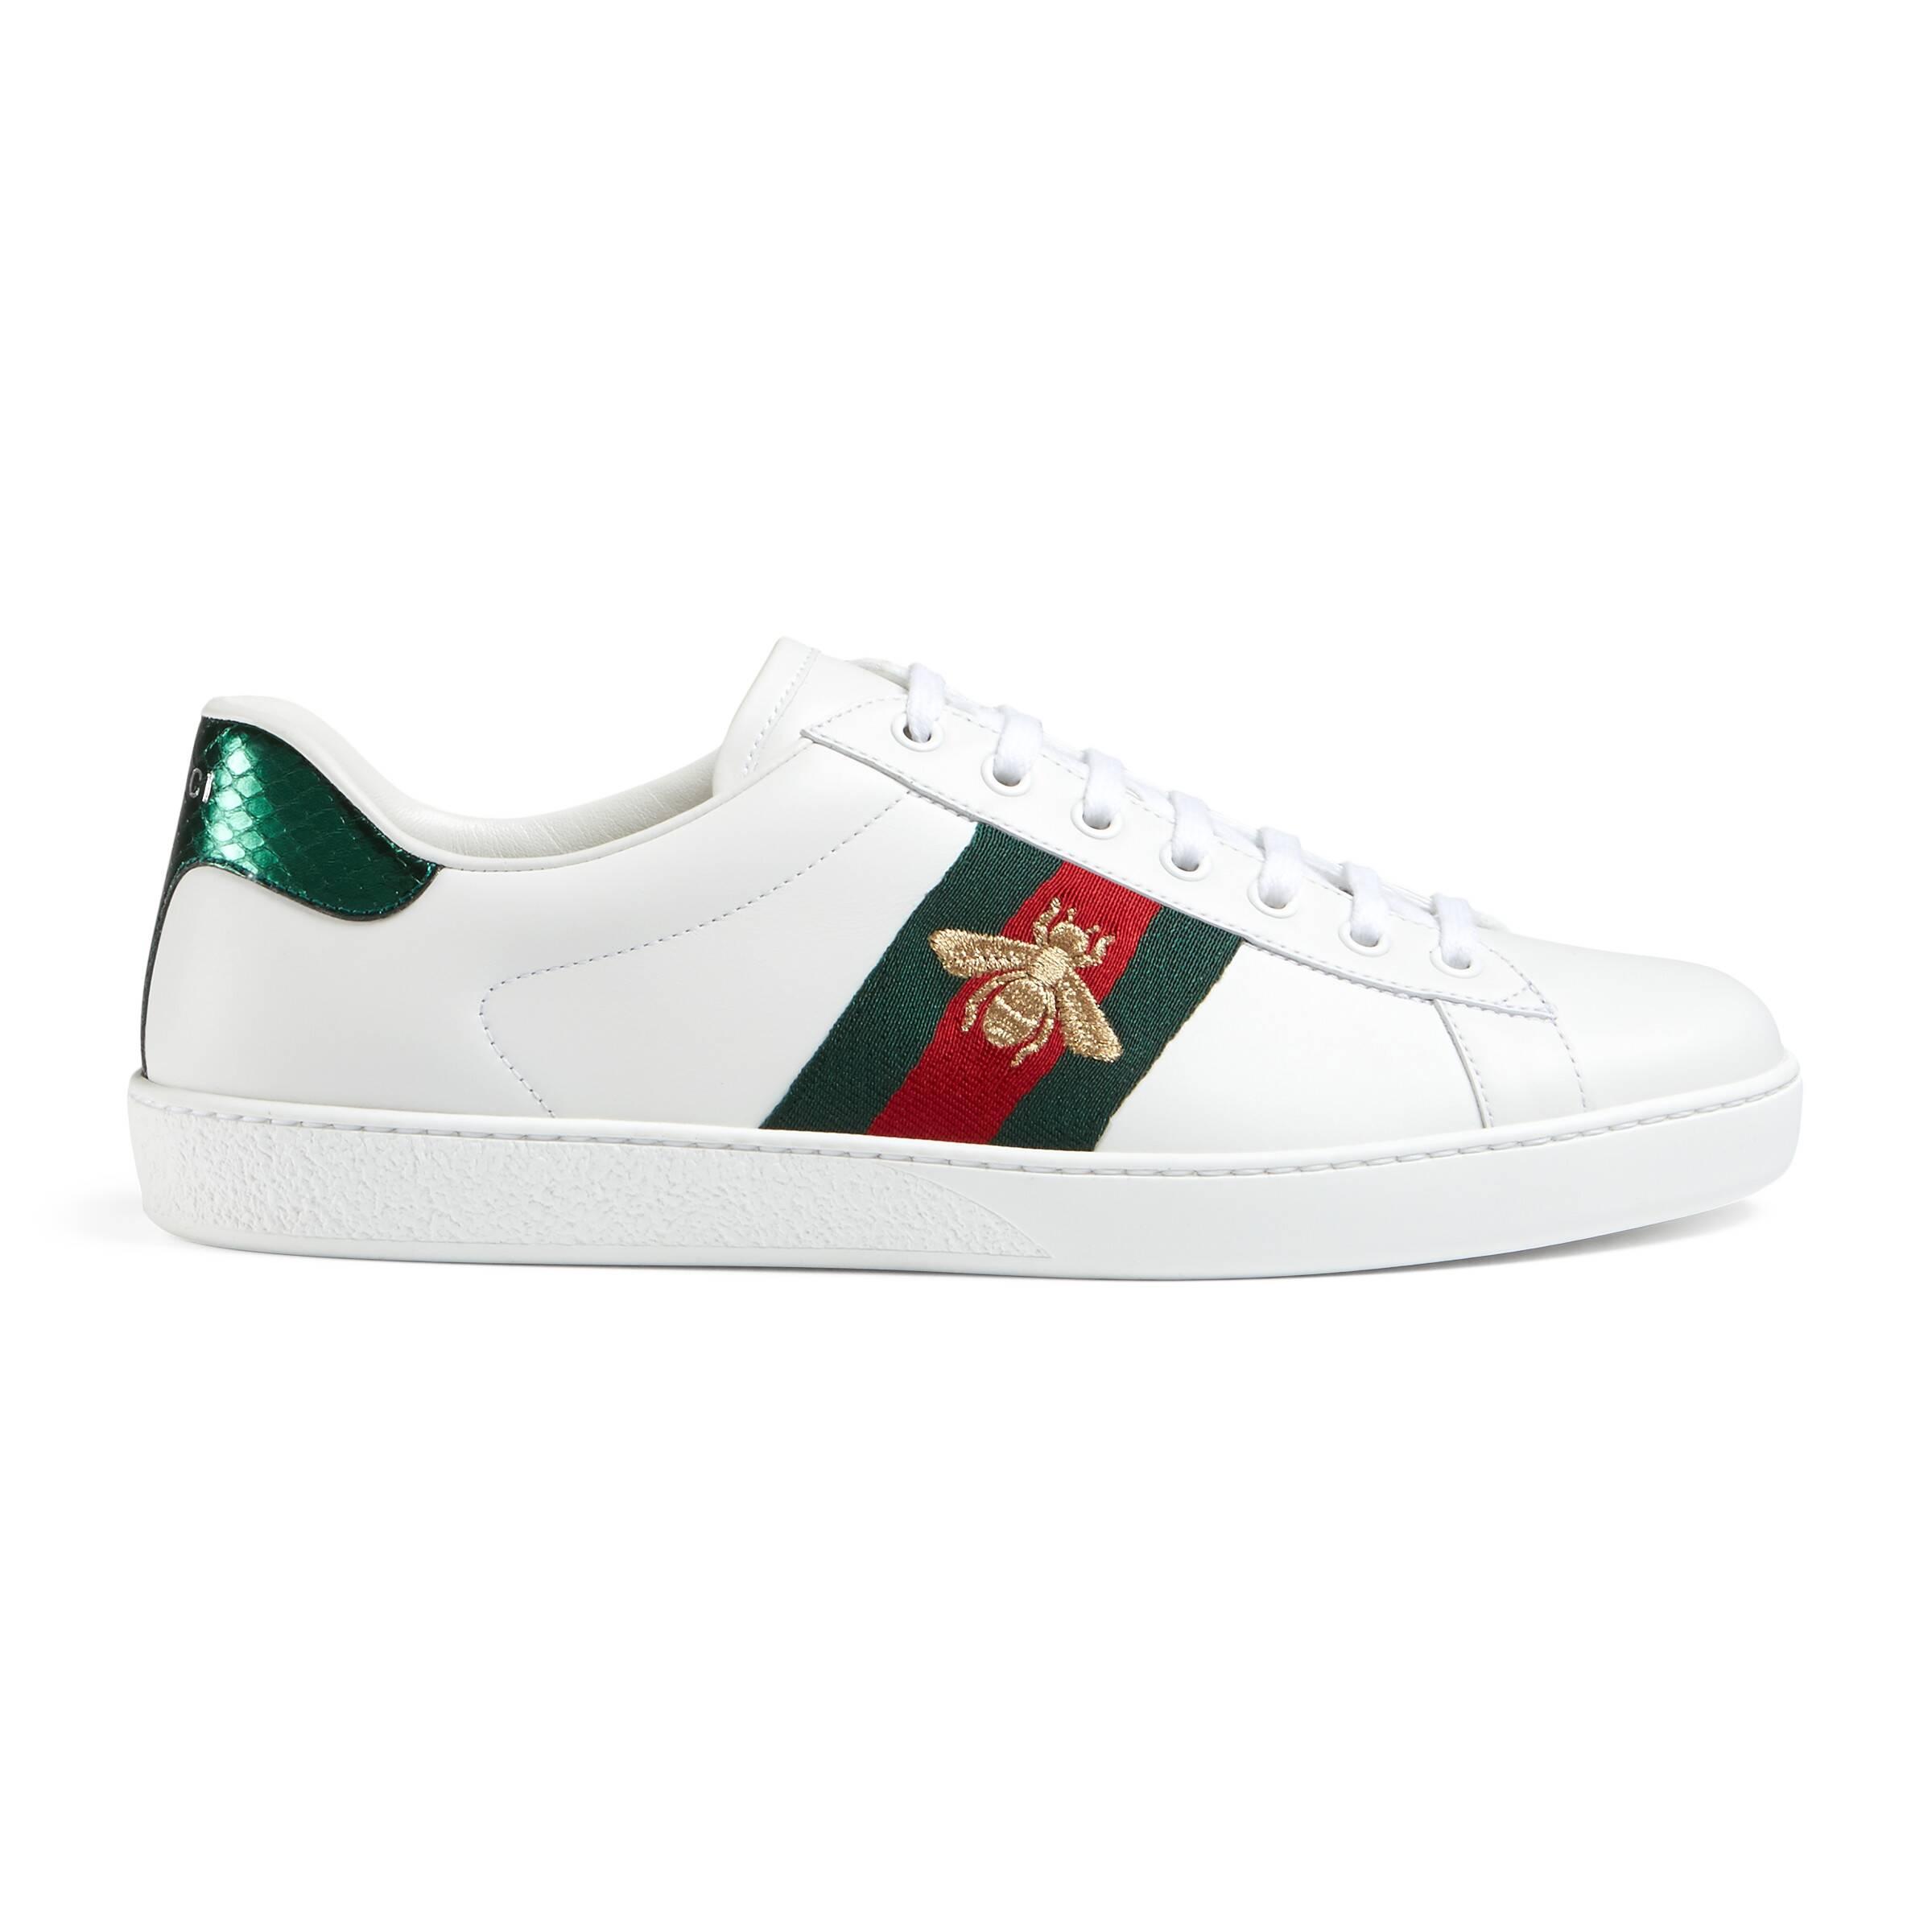 Gucci Leather Ace Embroidered Low-top Sneaker in White for Men - Lyst